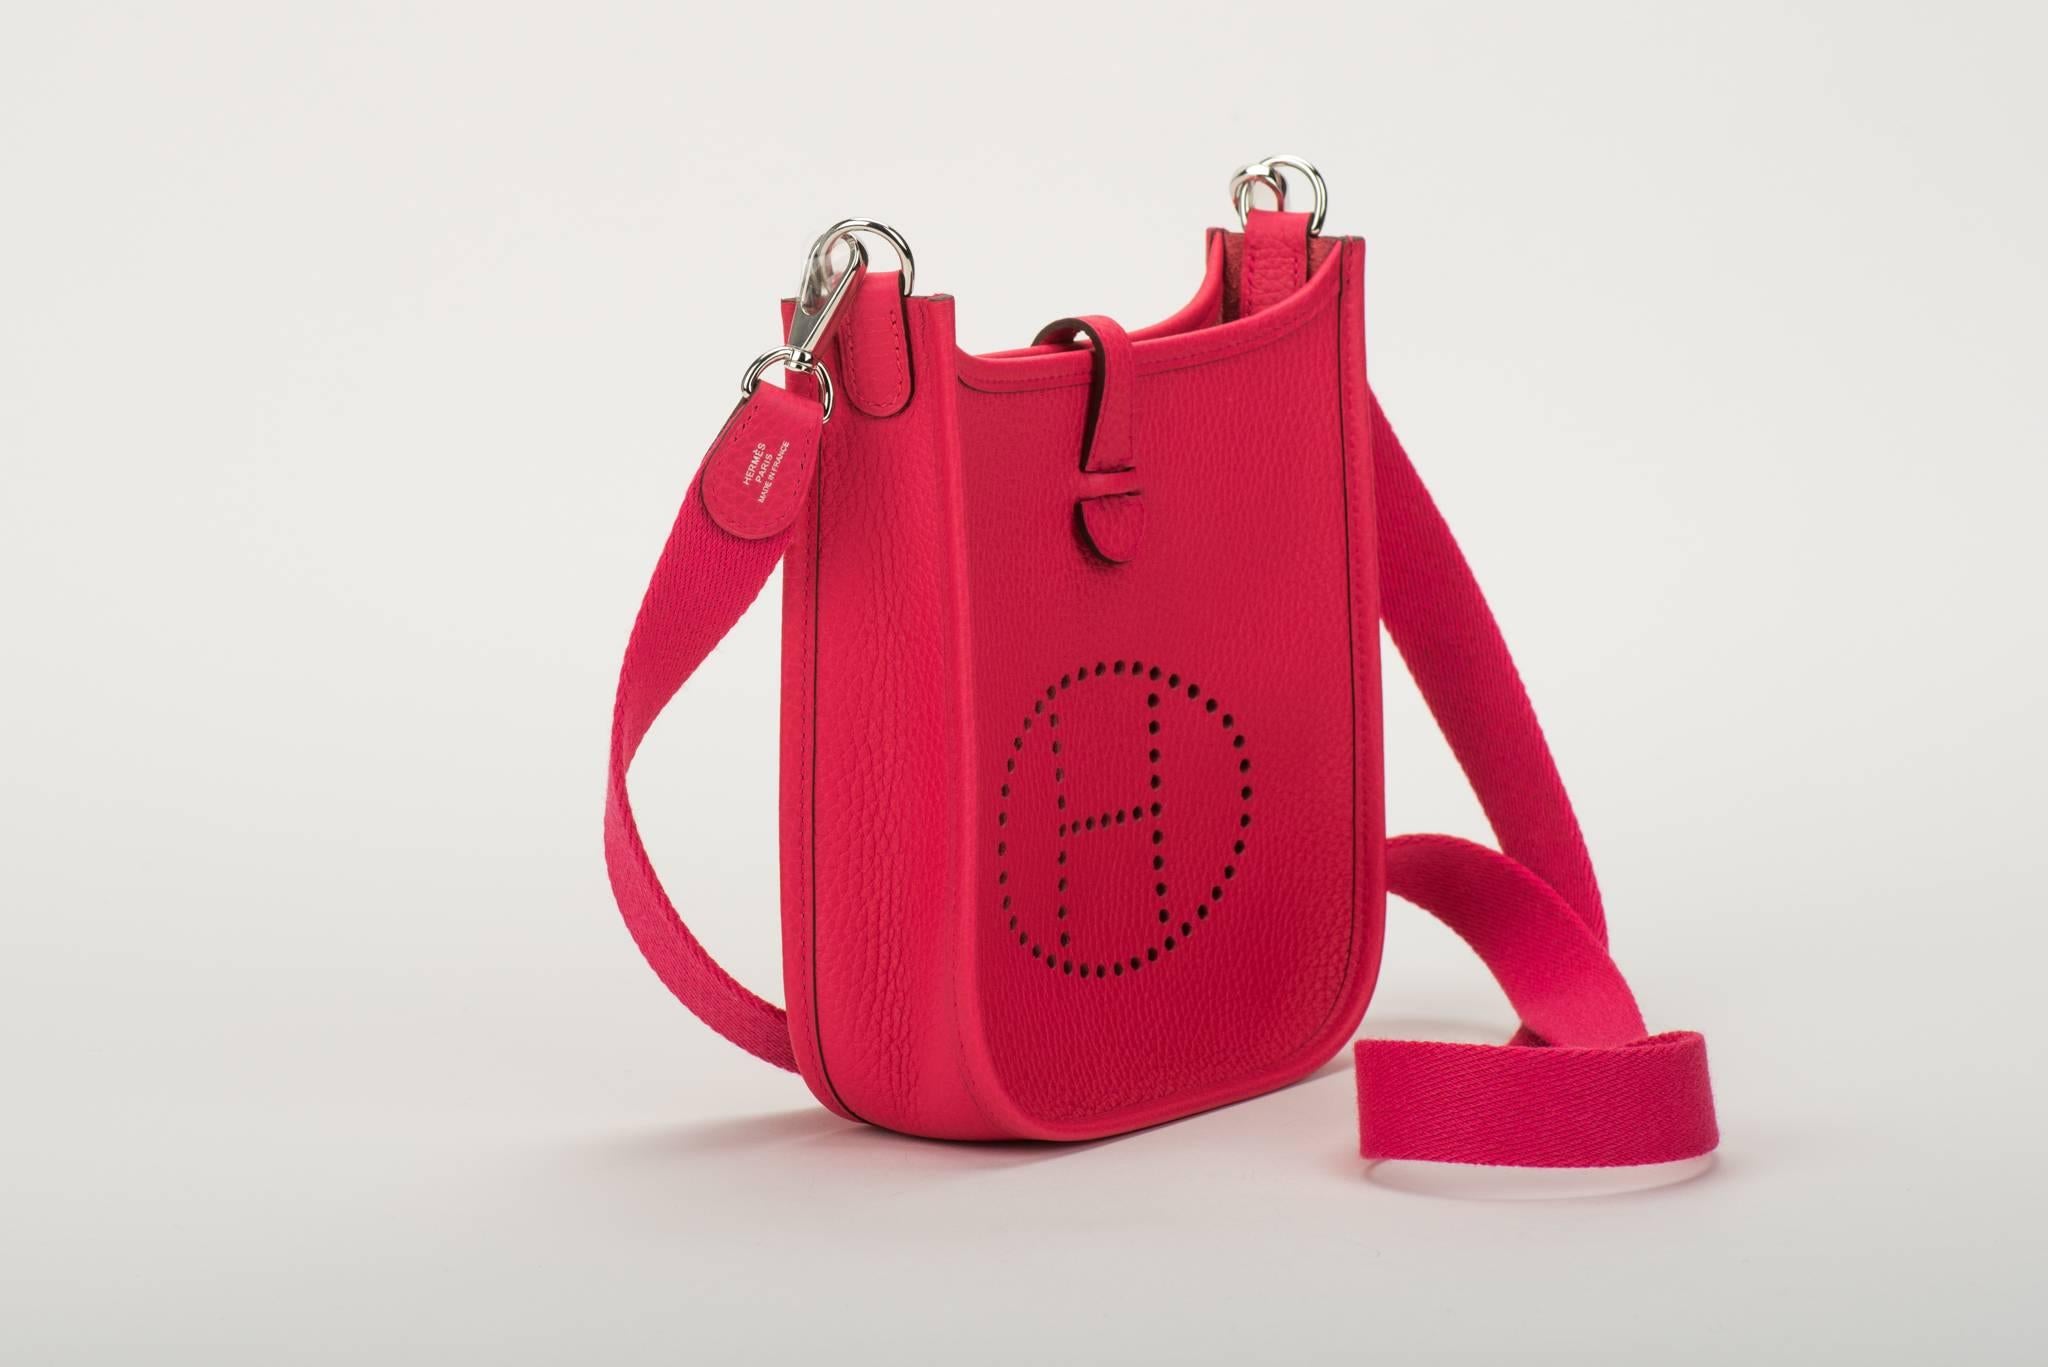 Hermès mini Evelyne shoulder bag in electric rose extreme clemence leather with palladium hardware. Never used. Dated 